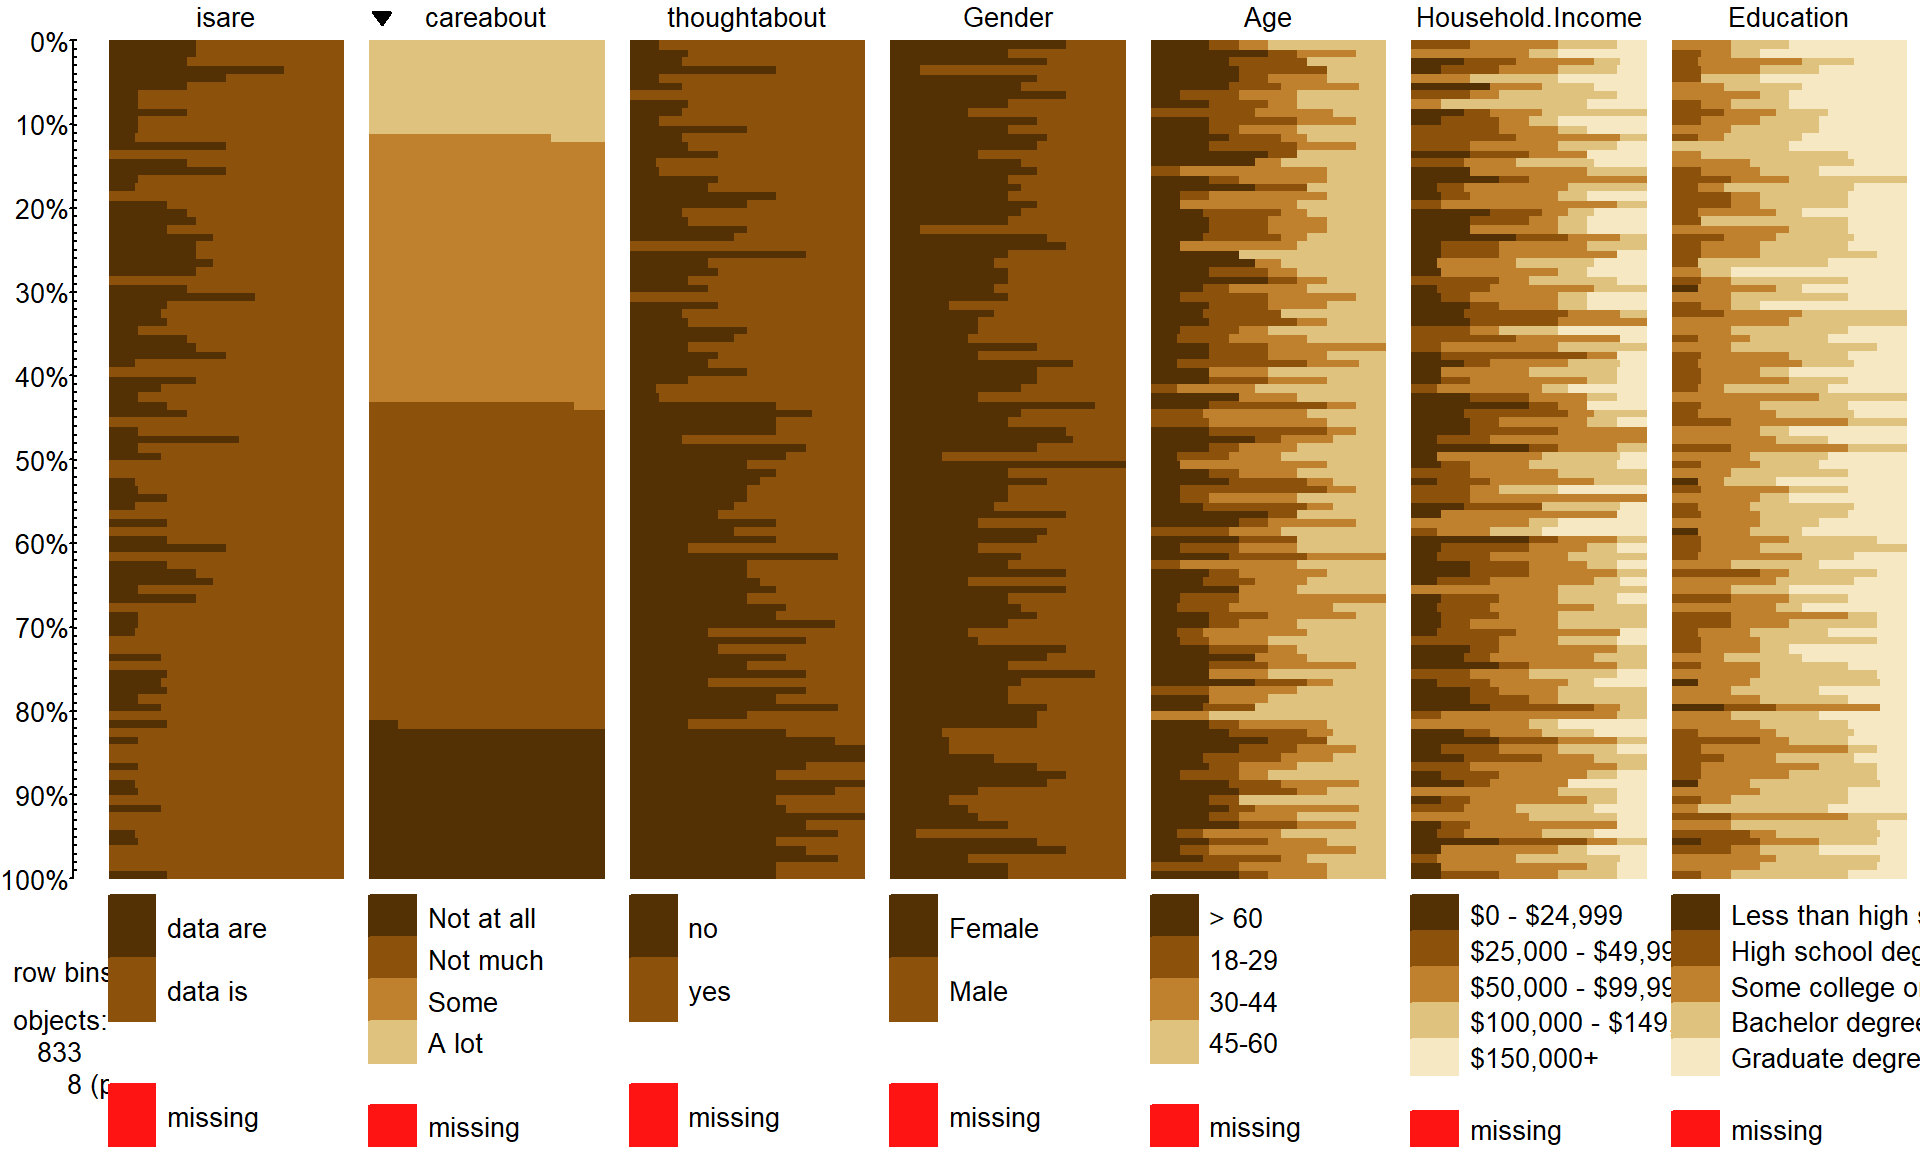 Tableplot of data from “data-is-vs-data-are” survey, sorted by “CareAbout” responses.